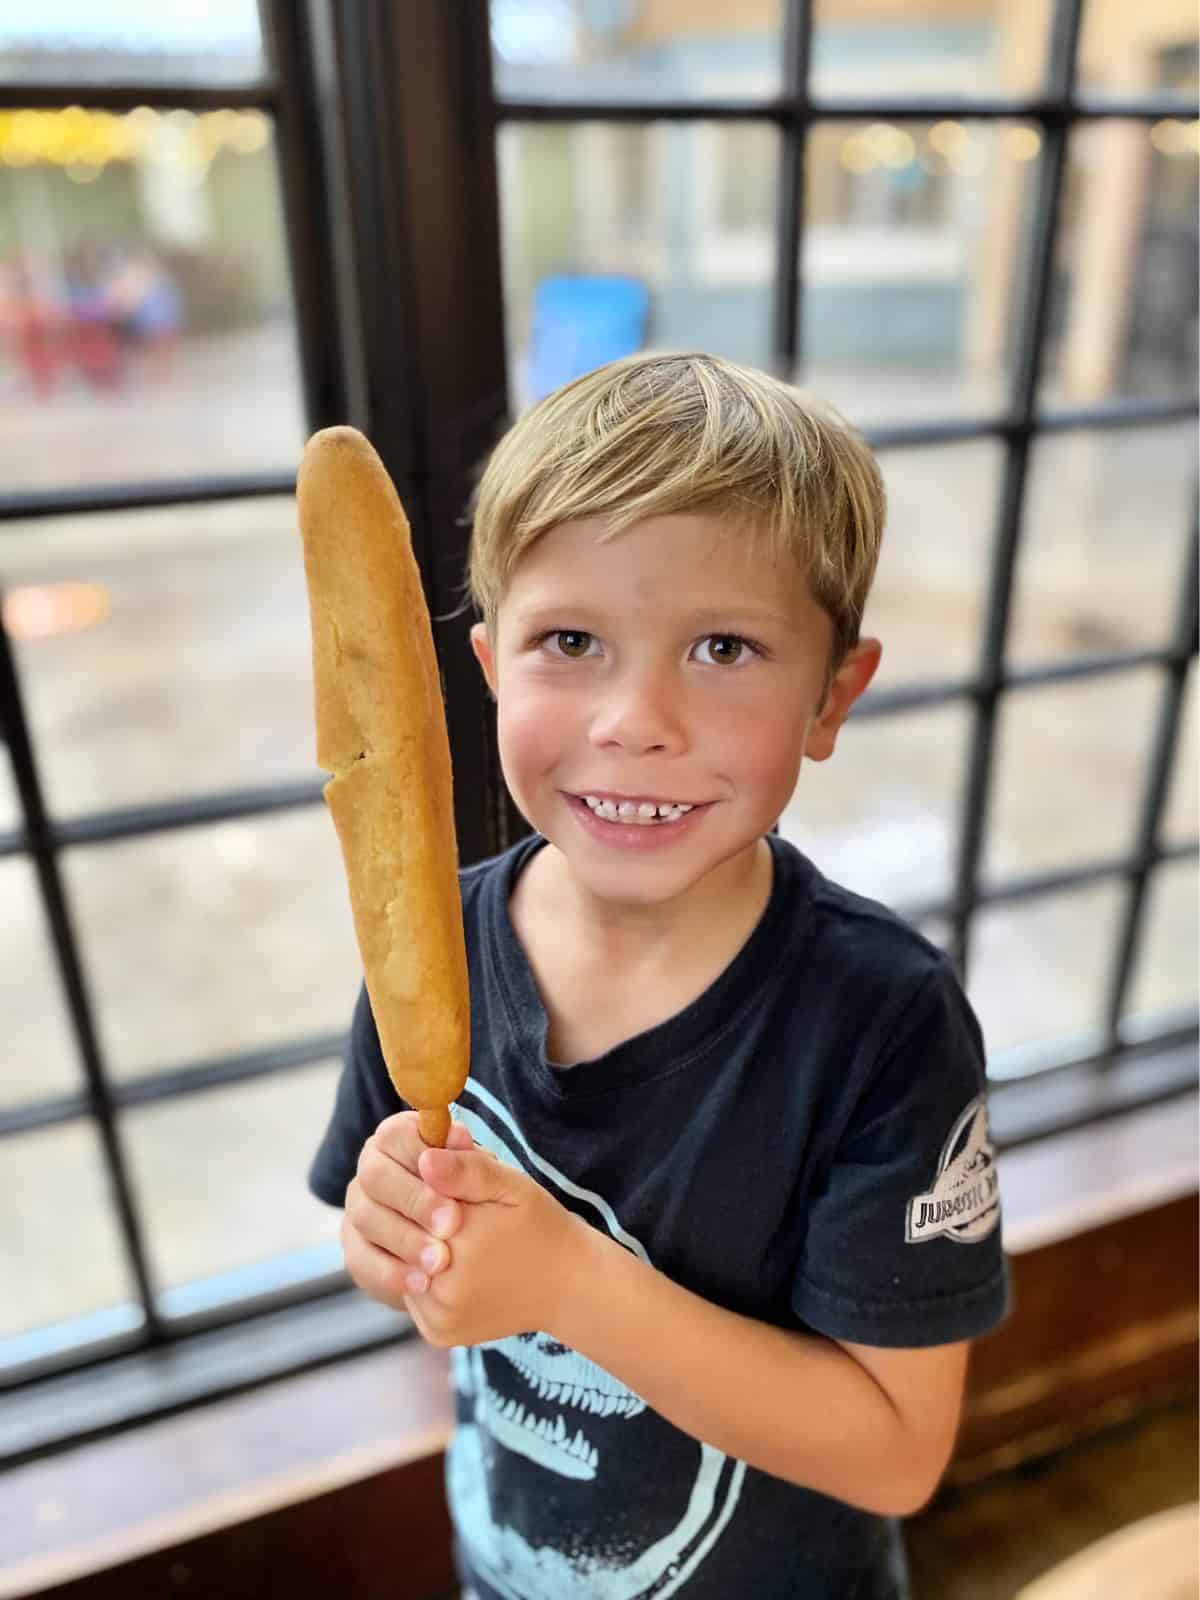 Little blonde haired boy in black shirt holding a foot long corn dog. 